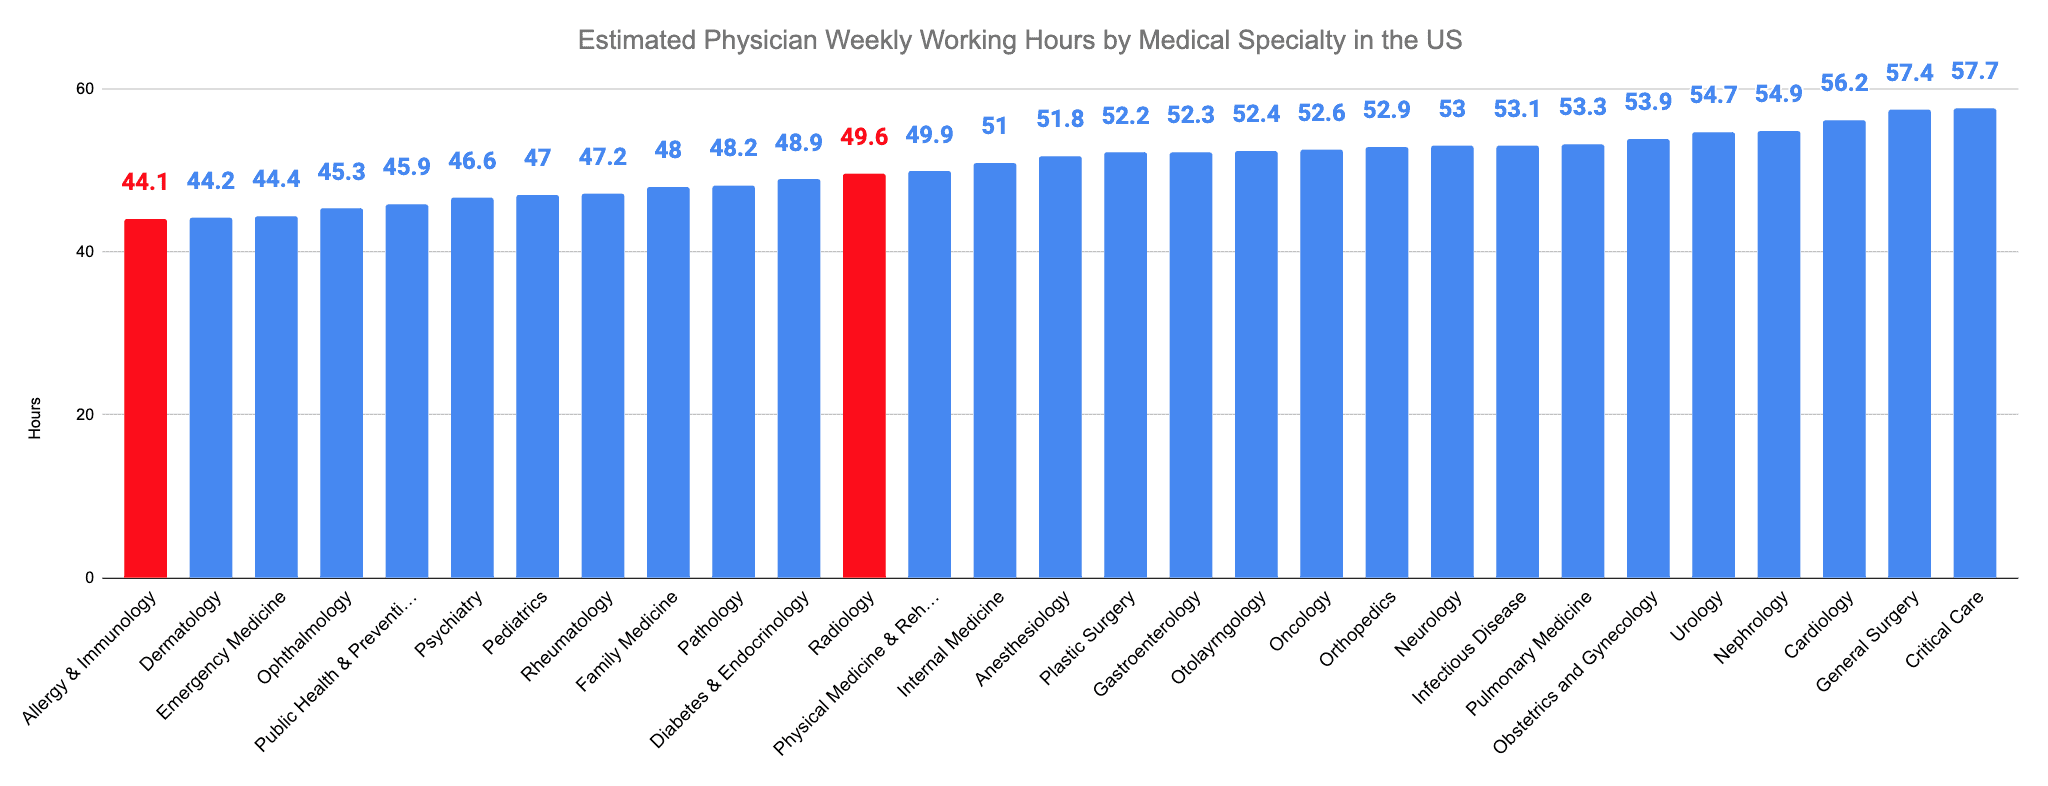 Radiology vs. Allergy and Immunology Estimated Physician Weekly Working Hours by Medical Specialty in the US